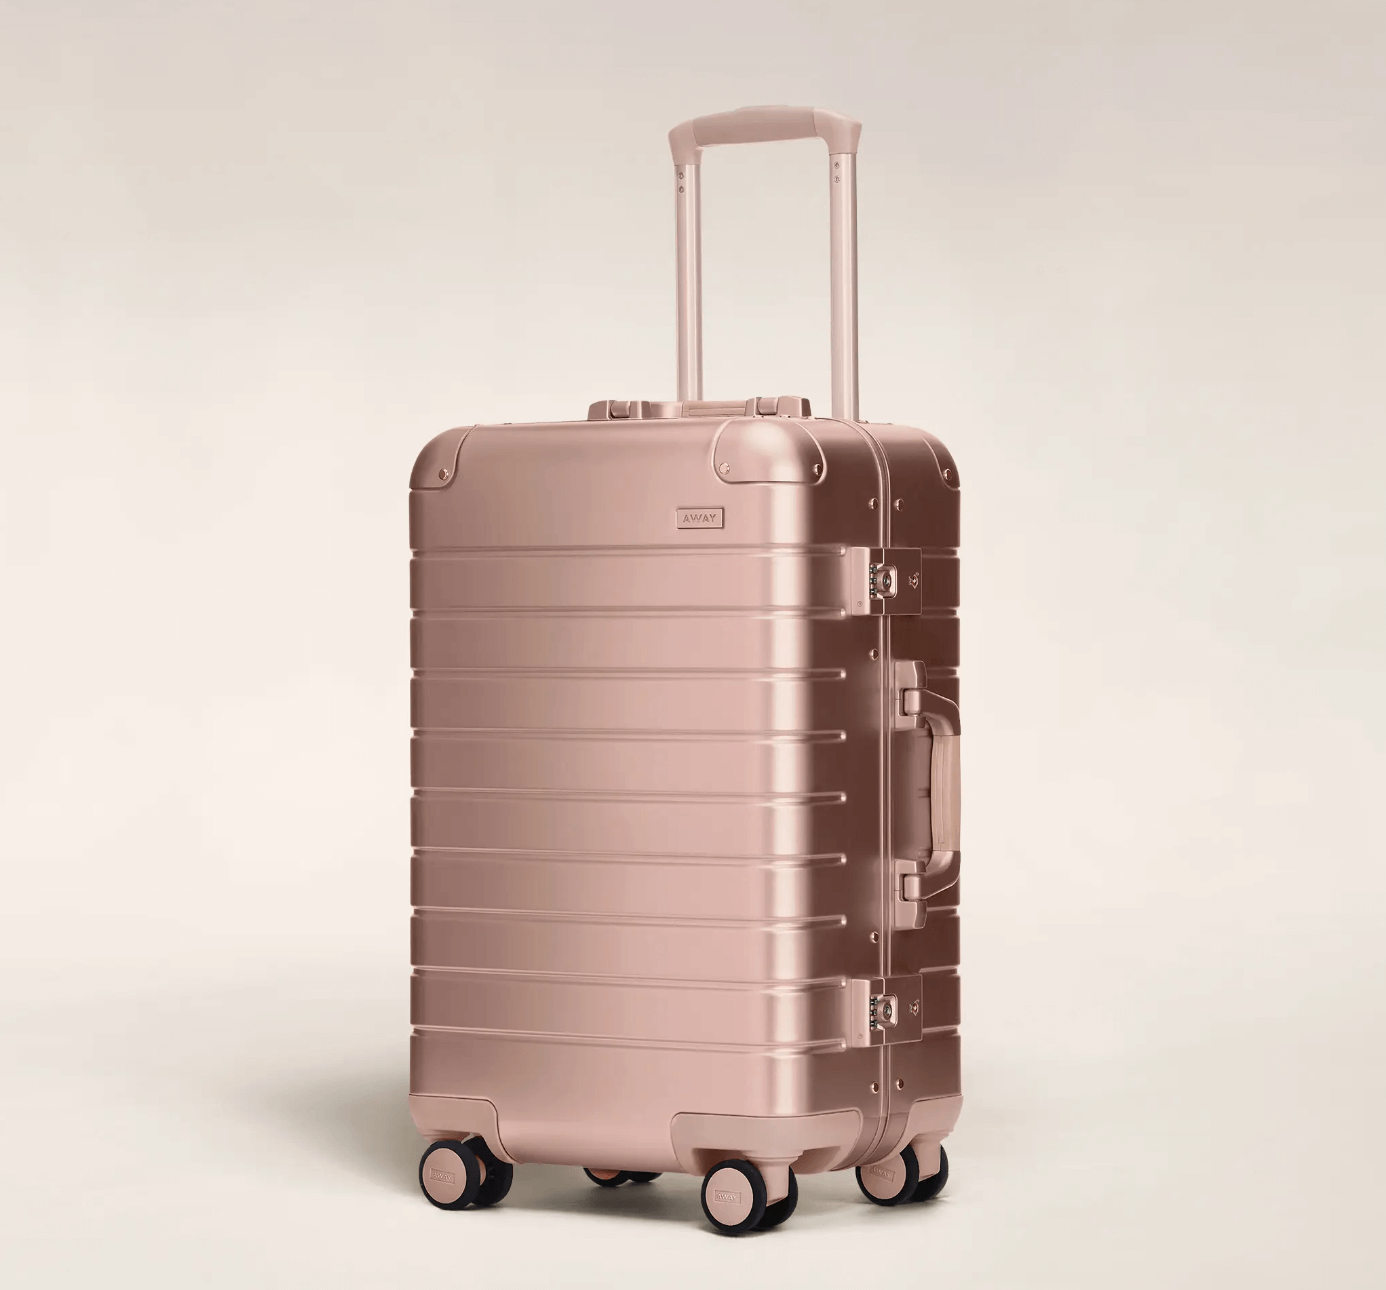 away aluminum carry on luggage rose gold